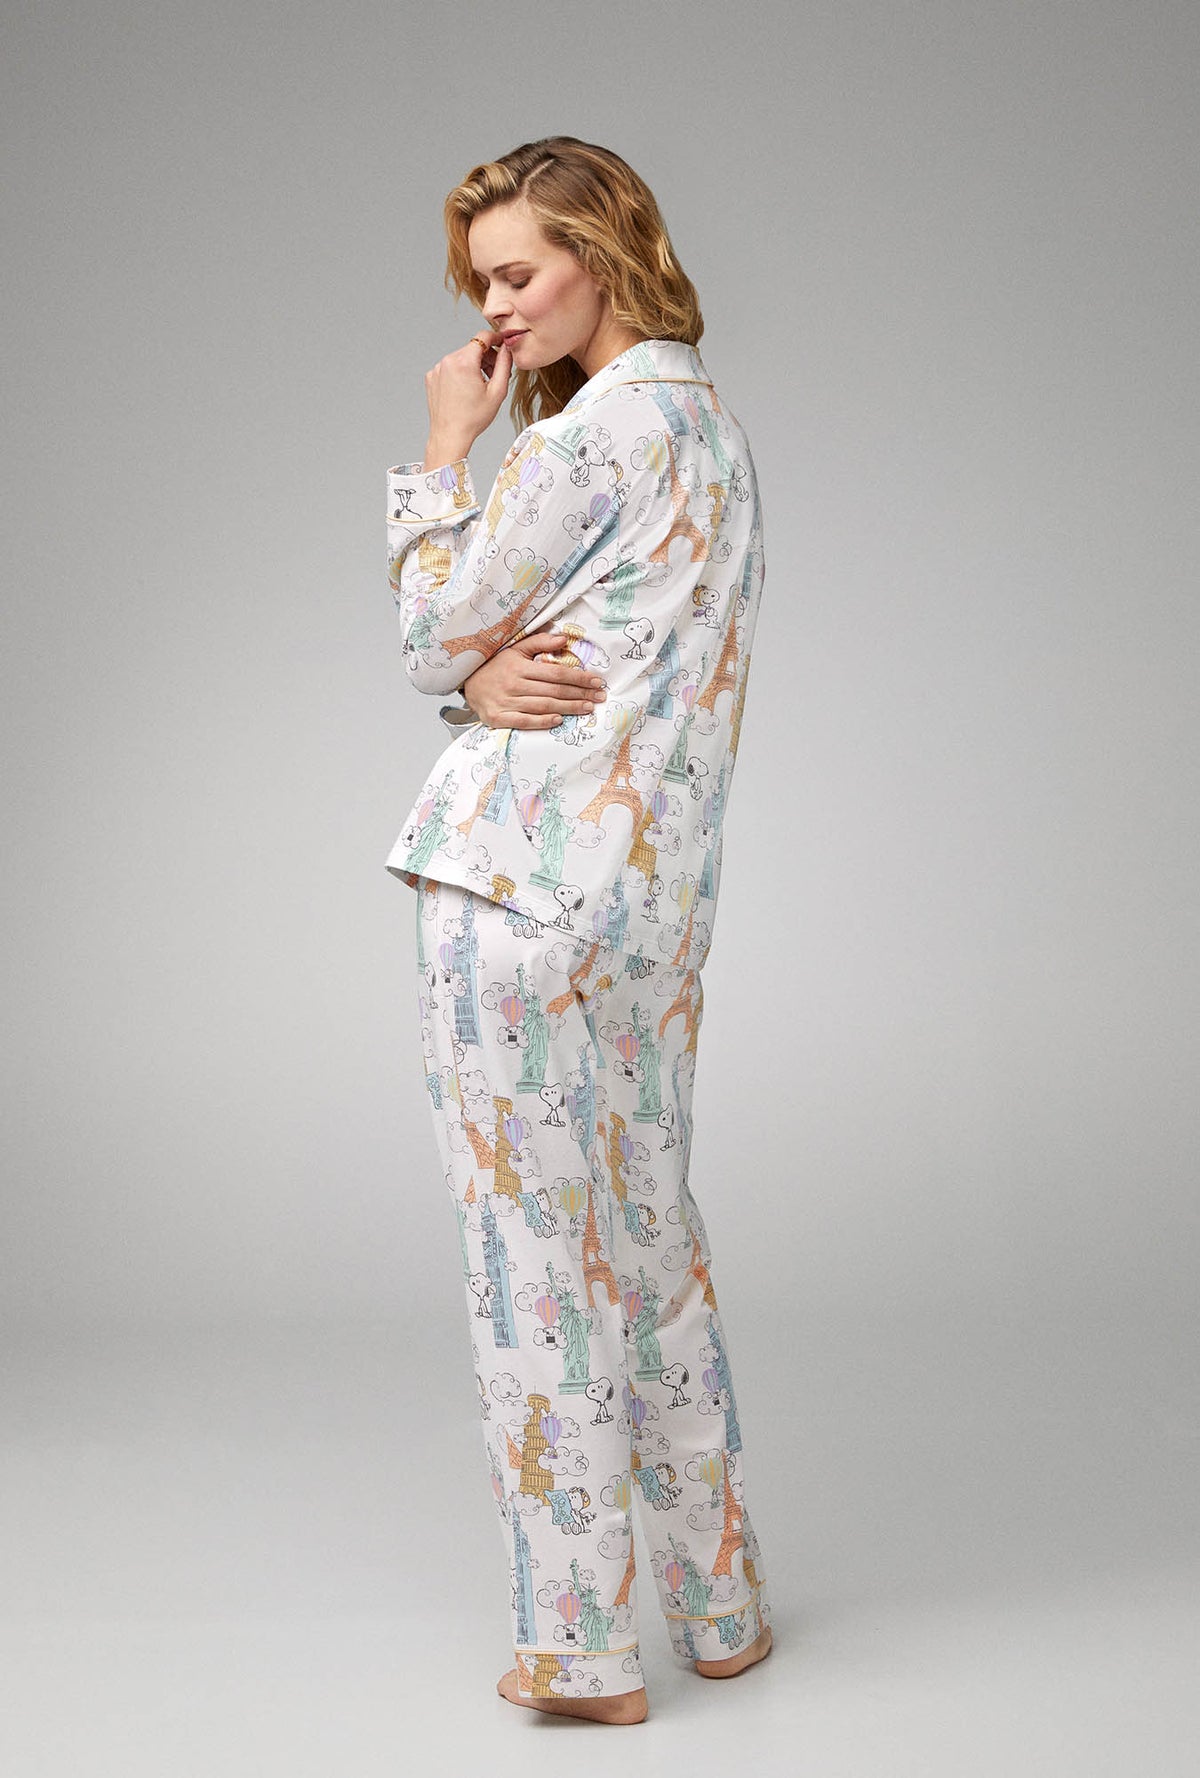 A lady wearing white  Long Sleeve Classic Stretch Jersey PJ Set with Bon Voyage Snoopy print